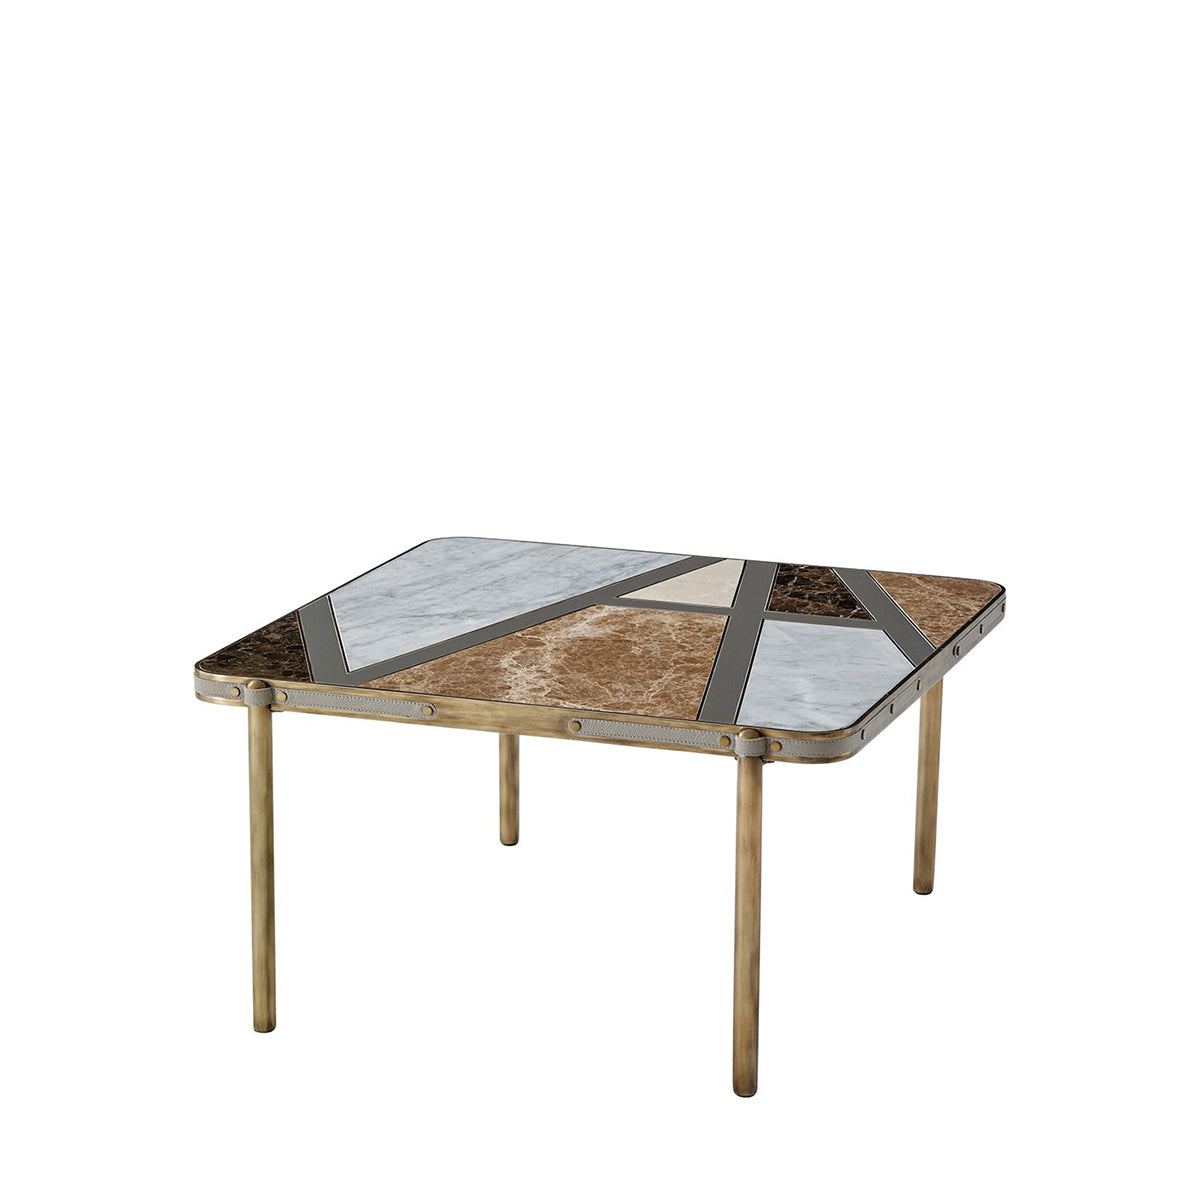 ICONIC SQUARE COCKTAIL TABLE